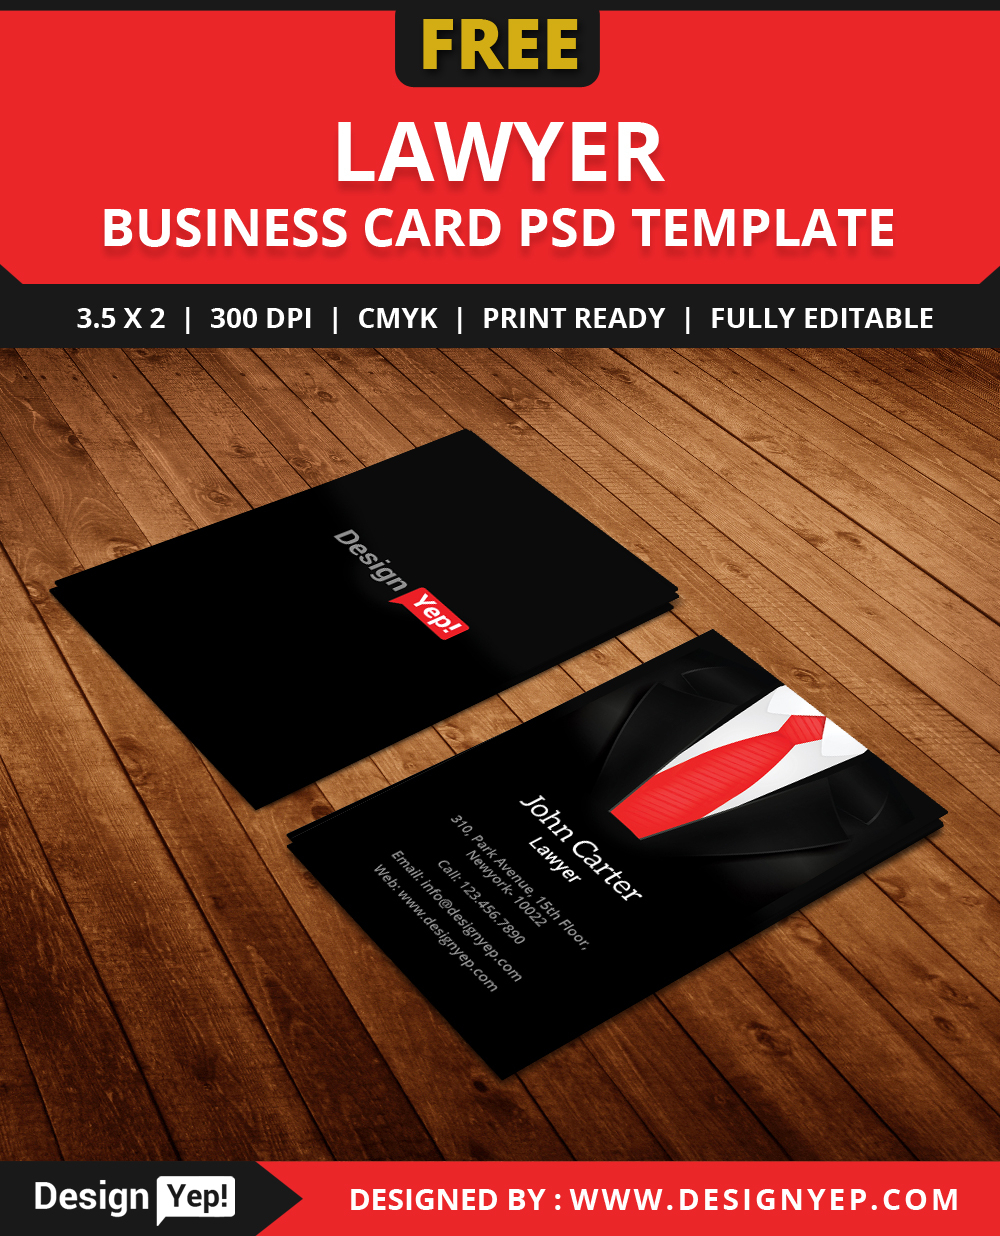 Free Lawyer Business Card Template Psd – Designyep Intended For Call Card Templates